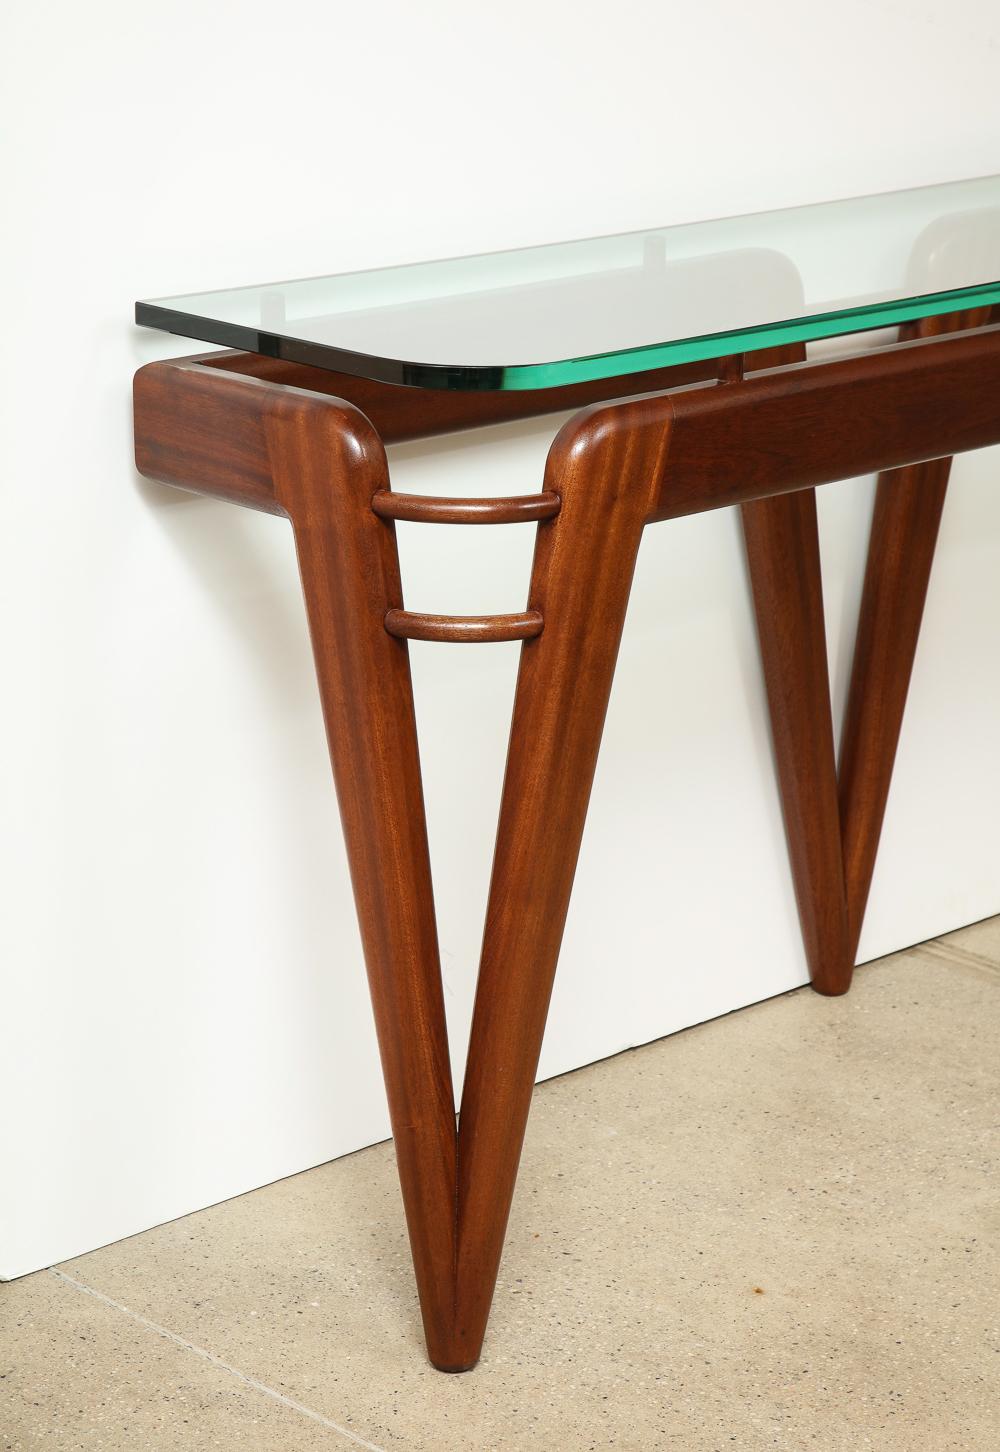 Studio-built mahogany console table that secures itself to the wall. Thick floating glass top with rounded corners.